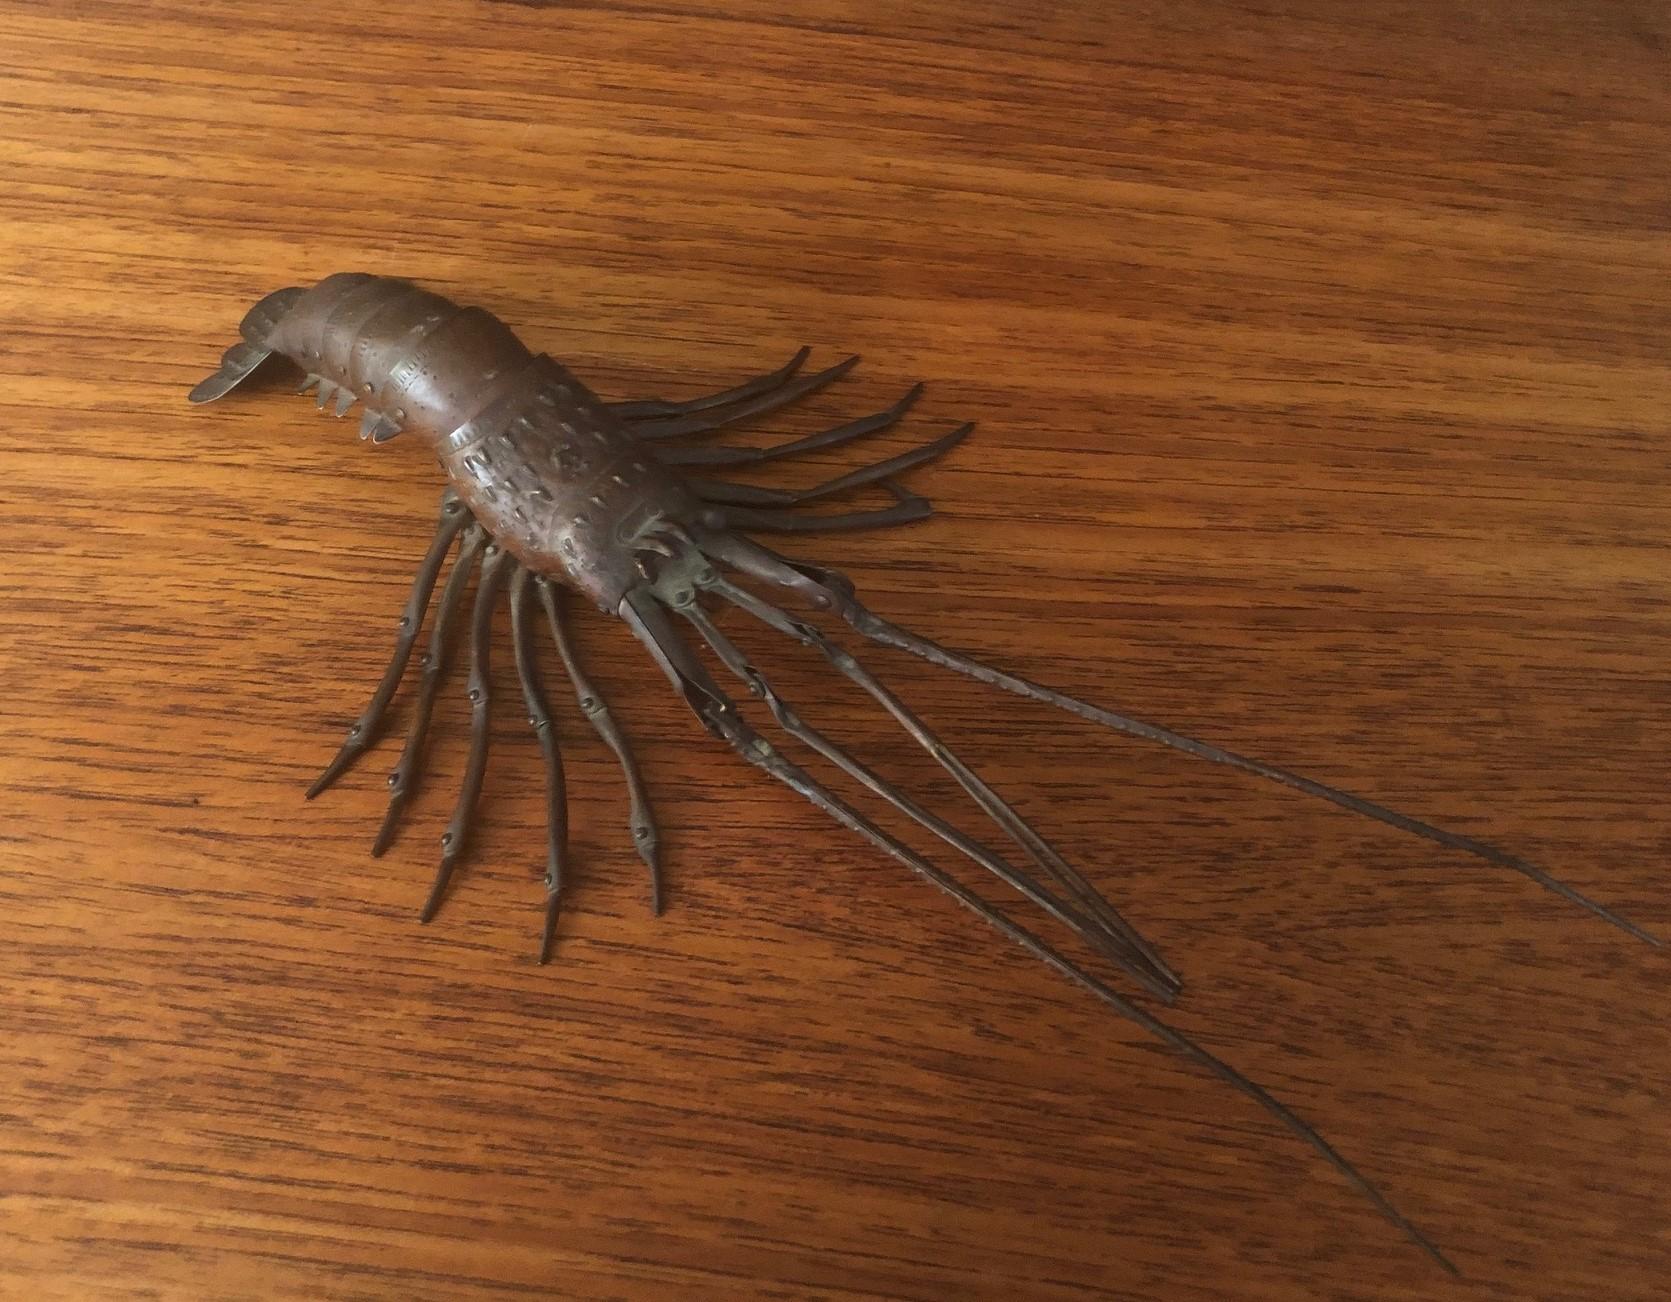 Antique signed Japanese articulated lobster / cray fish sculpture (Jizai Okimono) in copper, circa 1910s. The piece is well detailed and patinated.